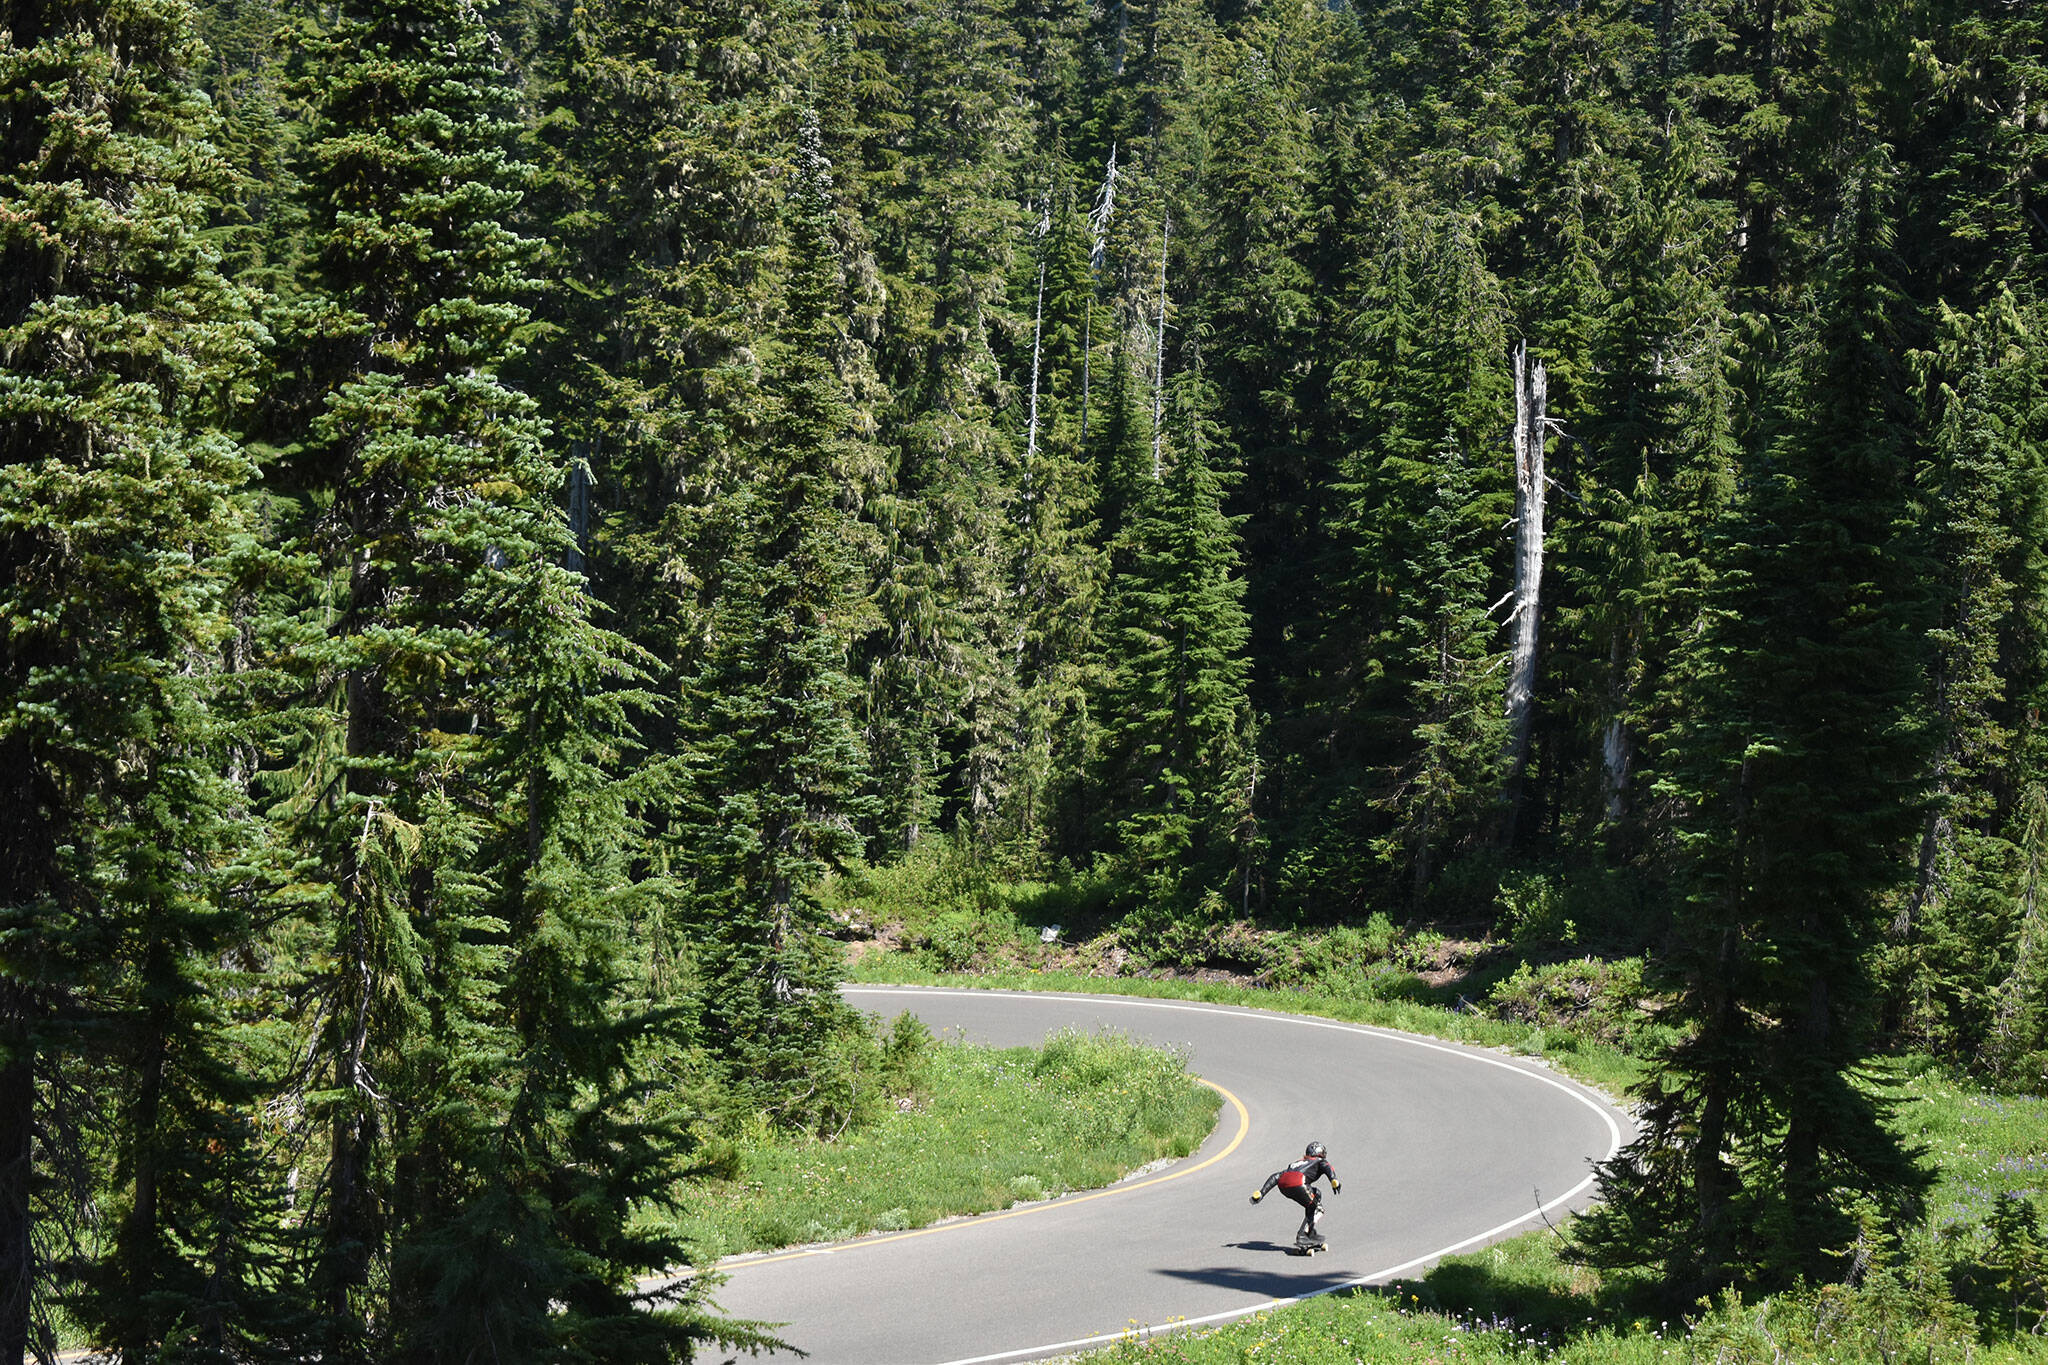 Marcie Morgan rushes through a road in the Mount Rainier National Park area. “You’re completely exposed, a little human being amongst the giant trees,” she said of the racing experience. “You have to push past the fear, watching the concrete fly by you.” Photo by Alex Bruell.